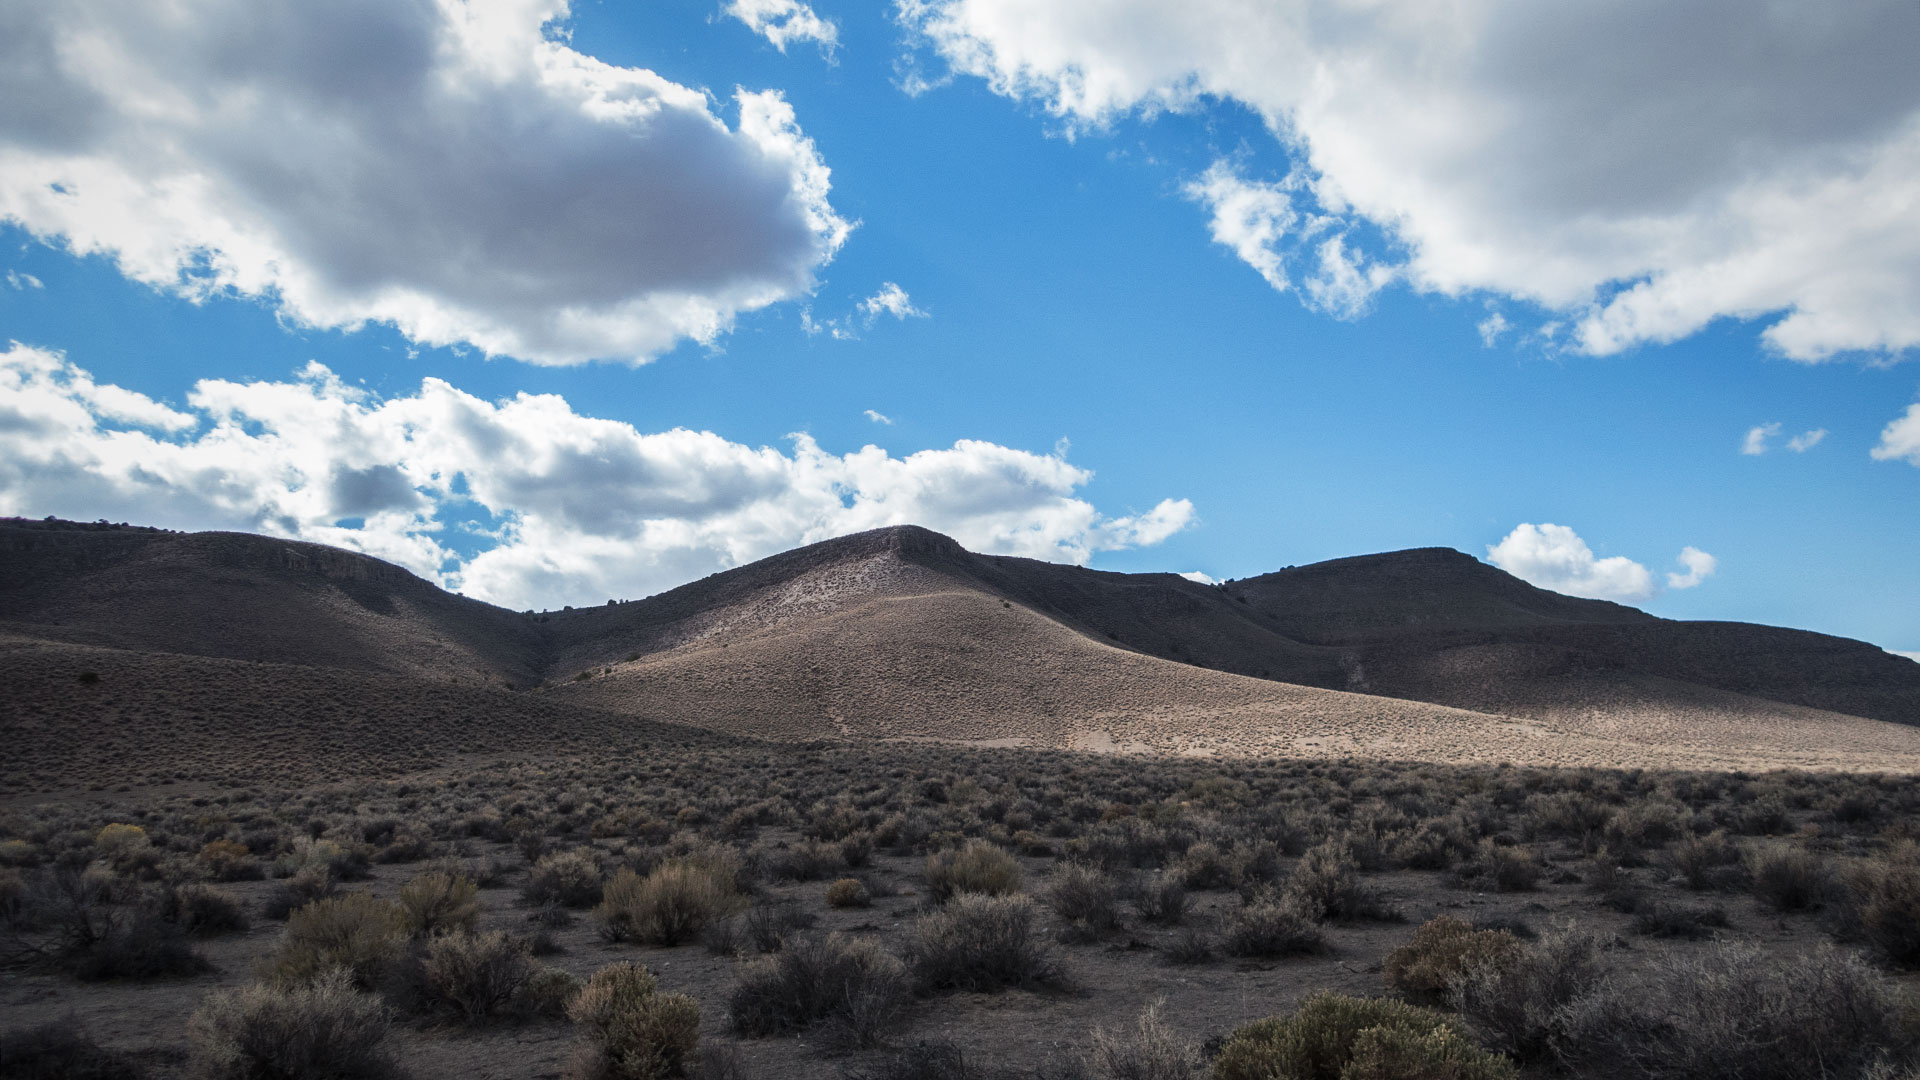 Blue skies and puffy clouds in Nevada's high desert